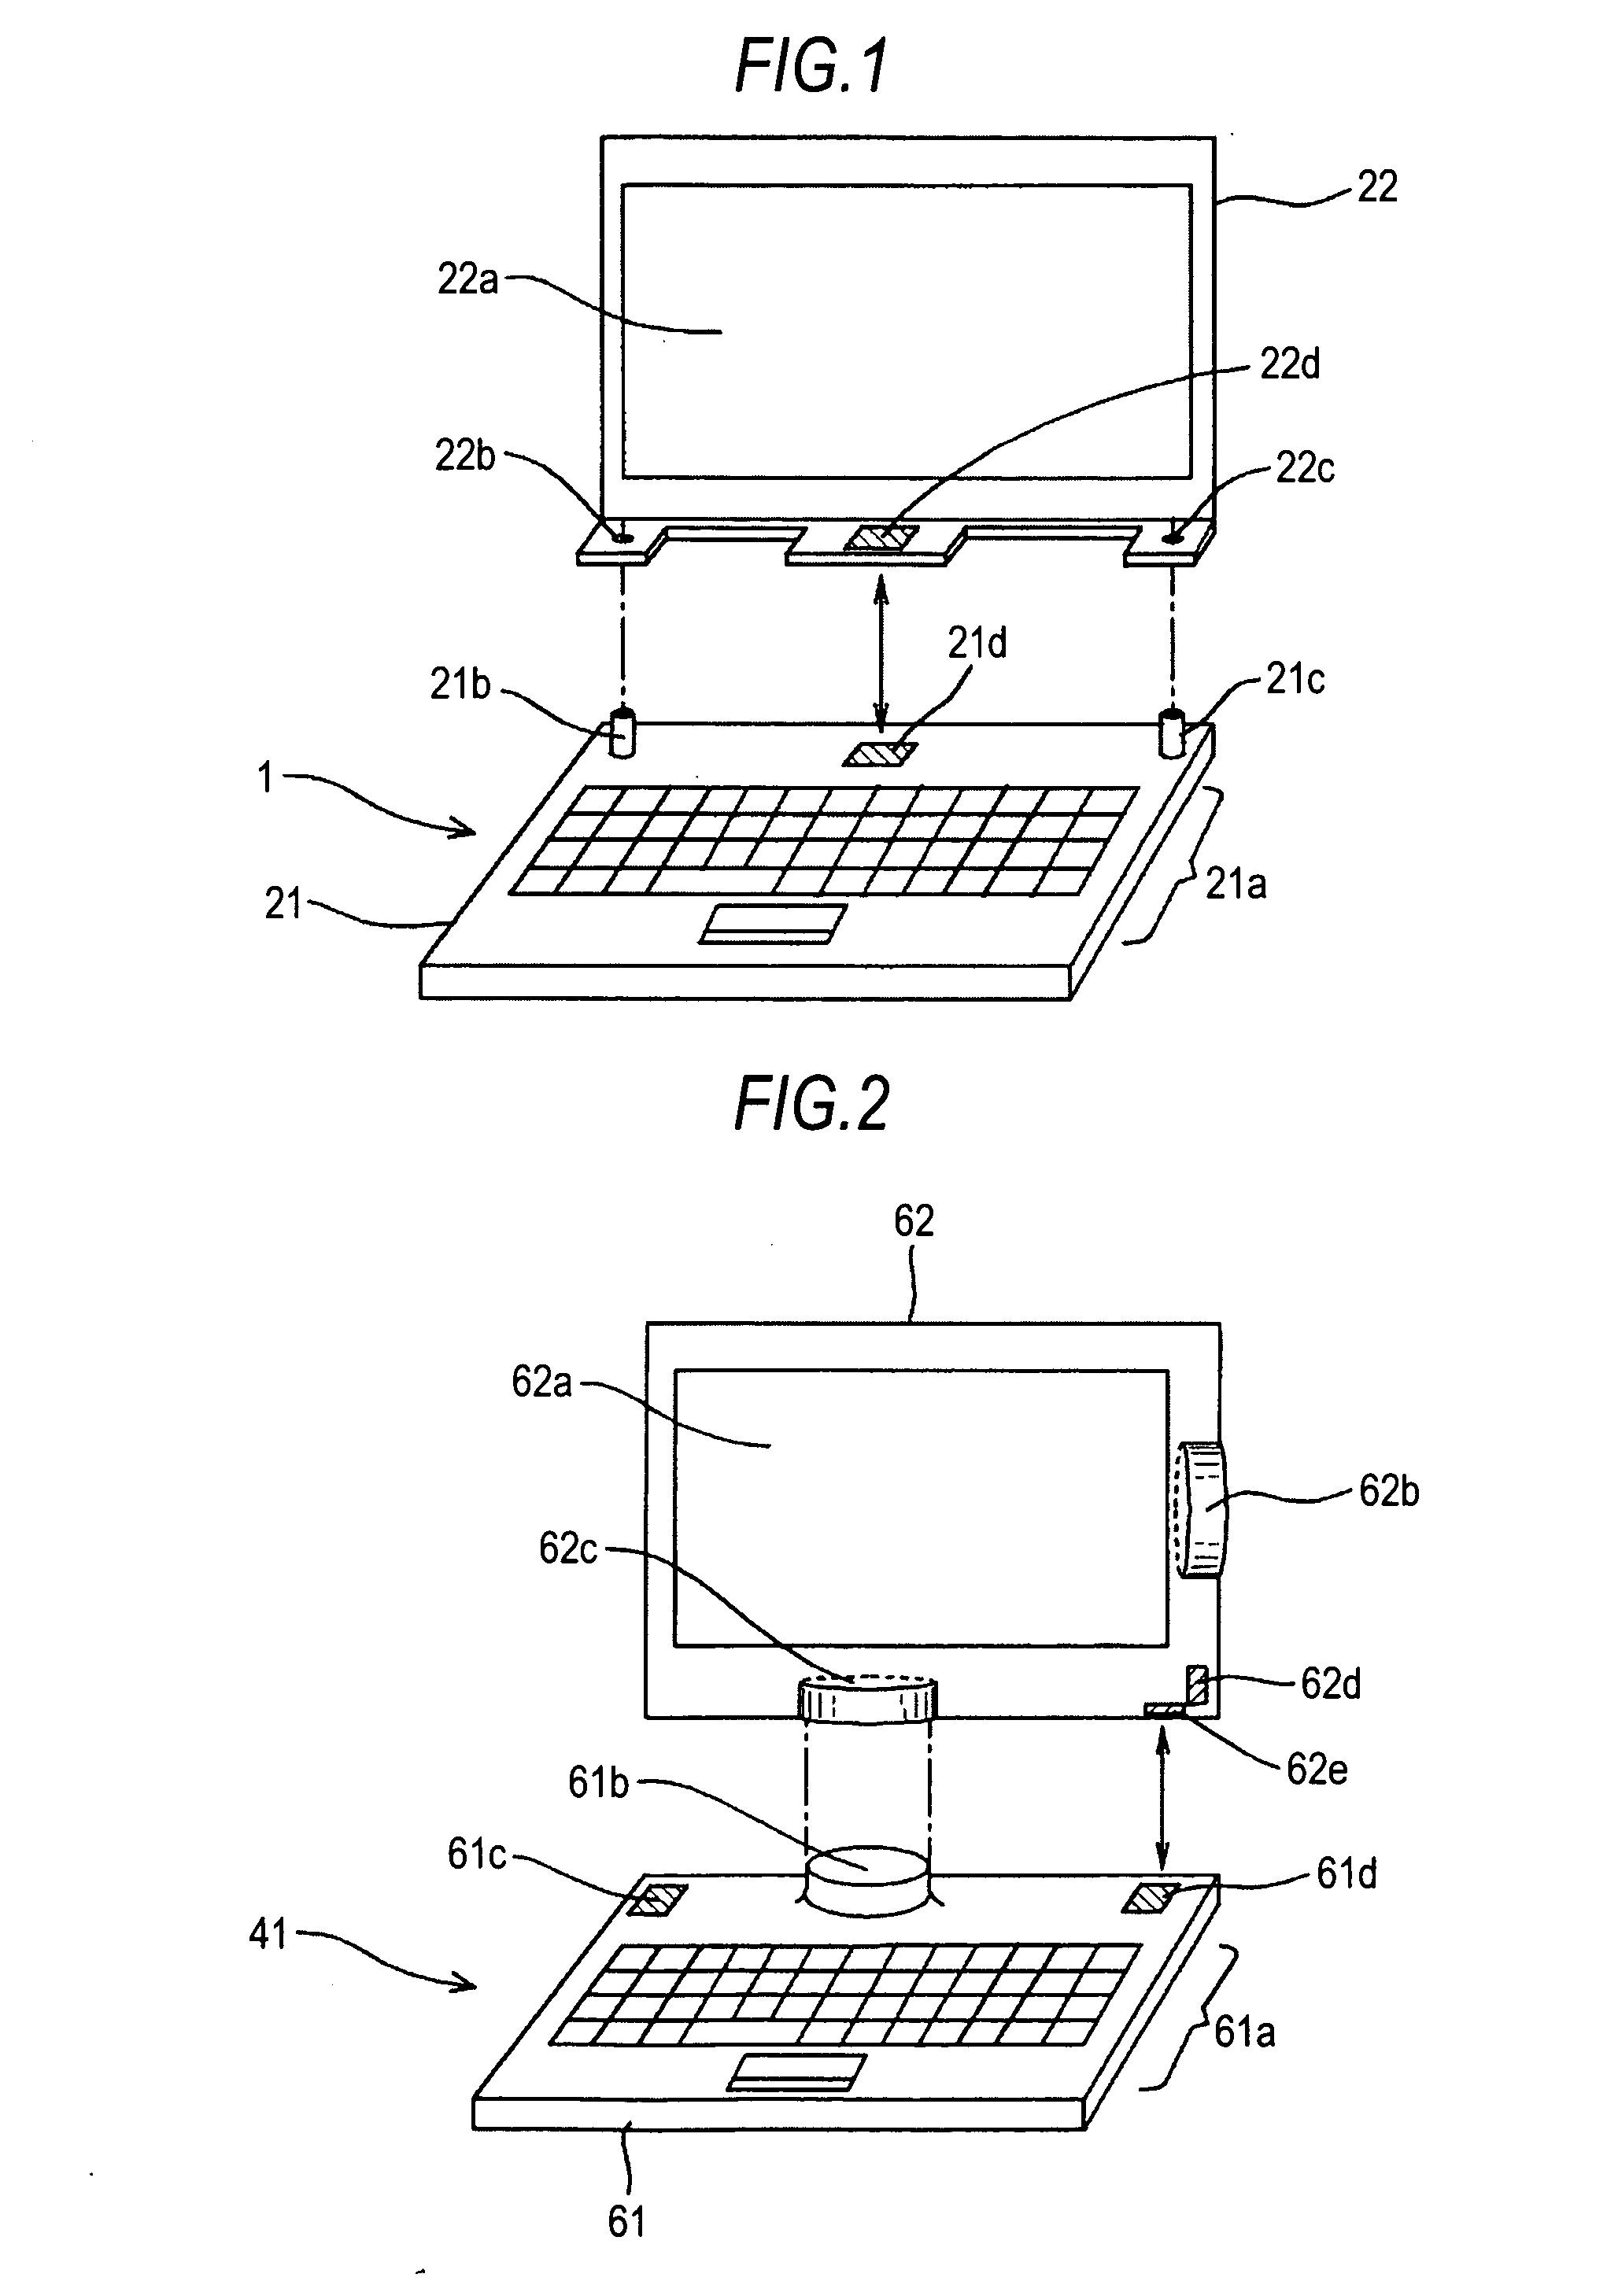 Information processing device